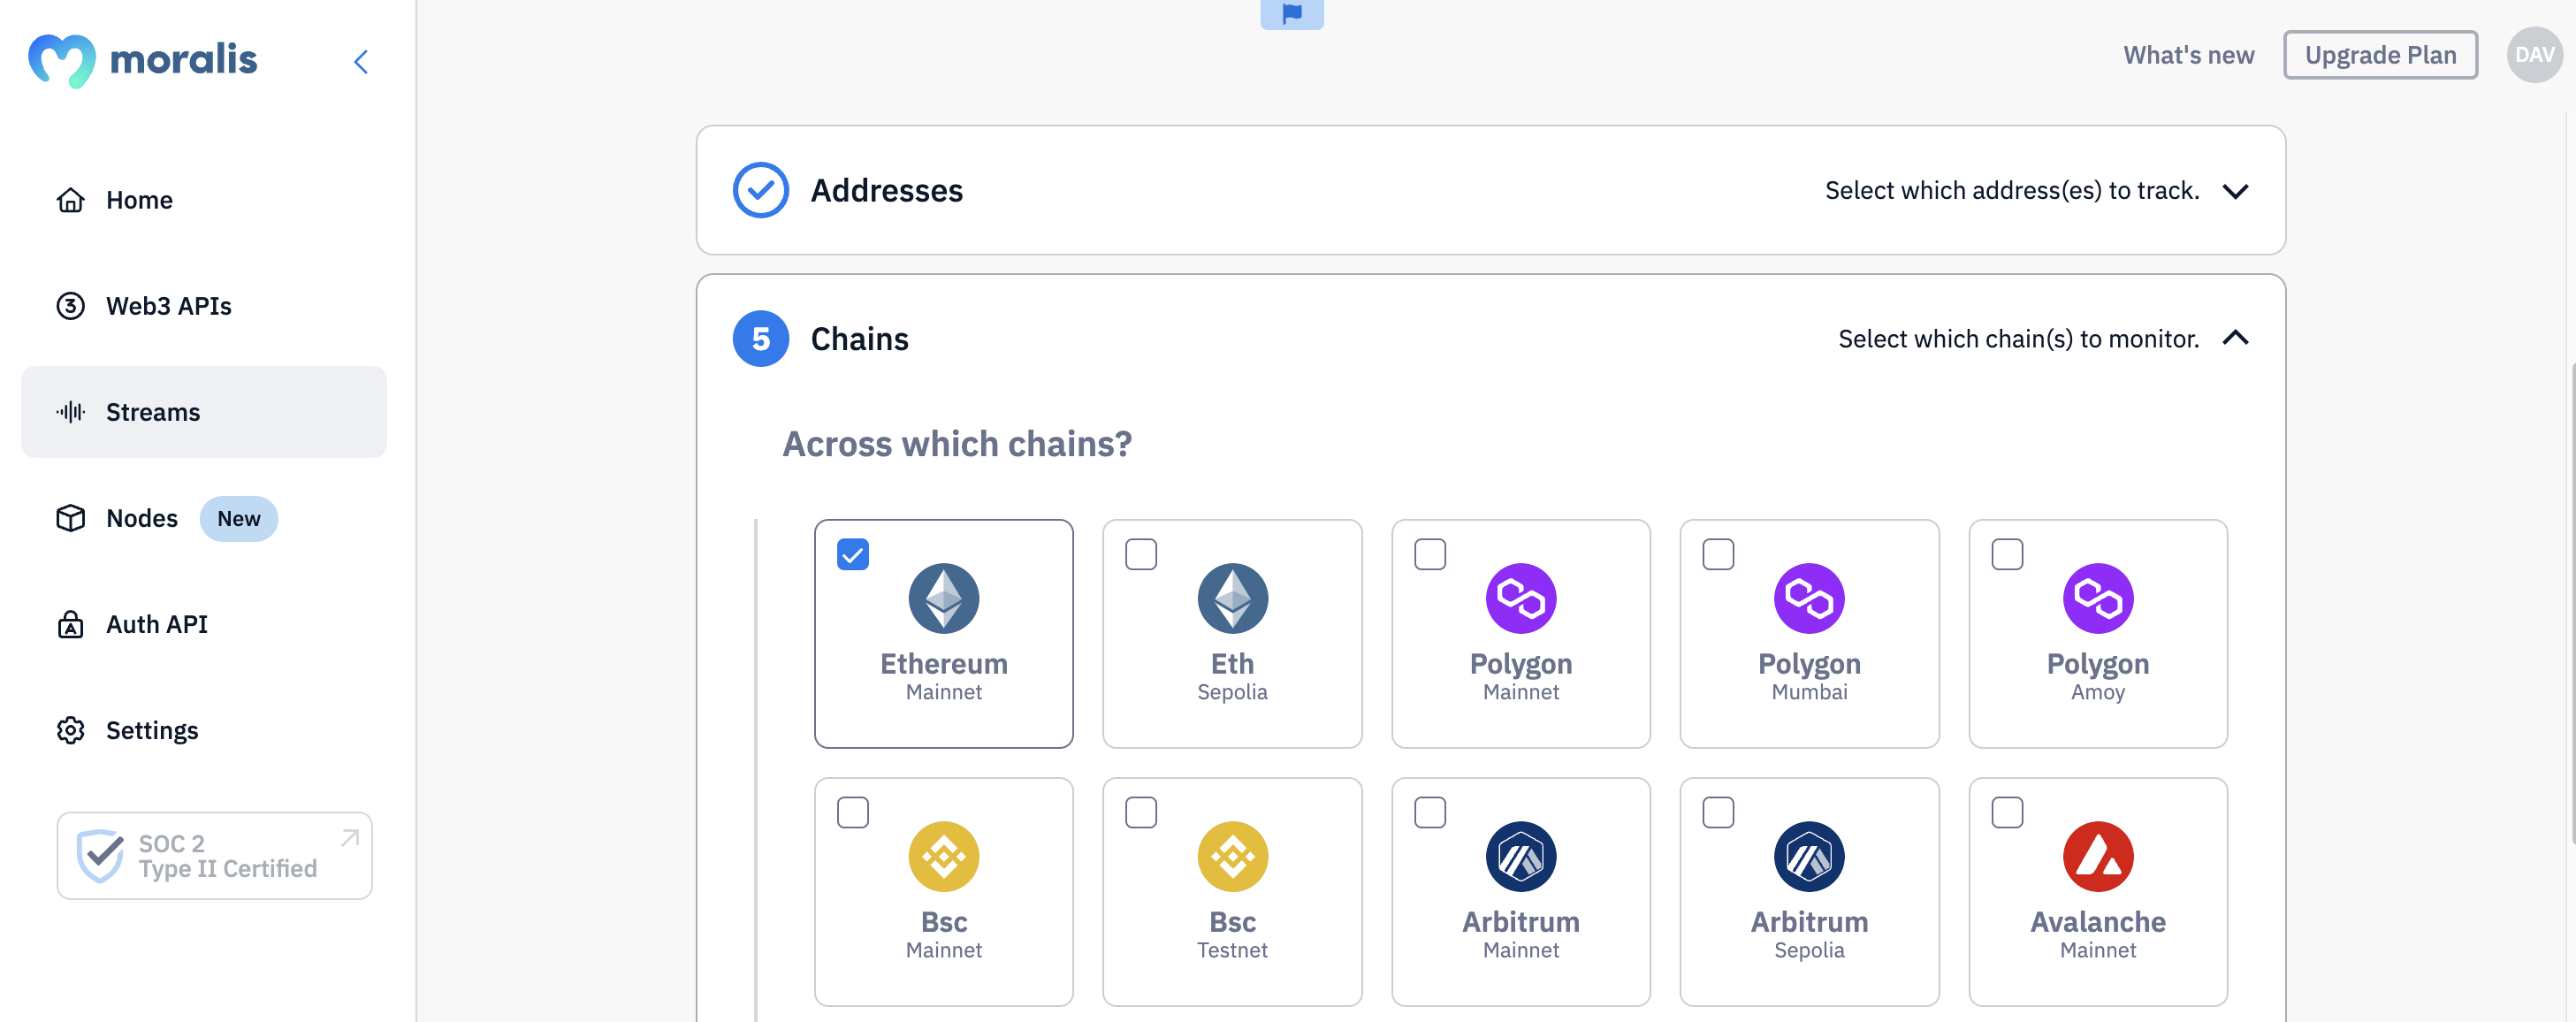 Step 6 - Select the chain(s) you want to monitor. We’ll choose Ethereum, but you can pick any network(s) you desire: 